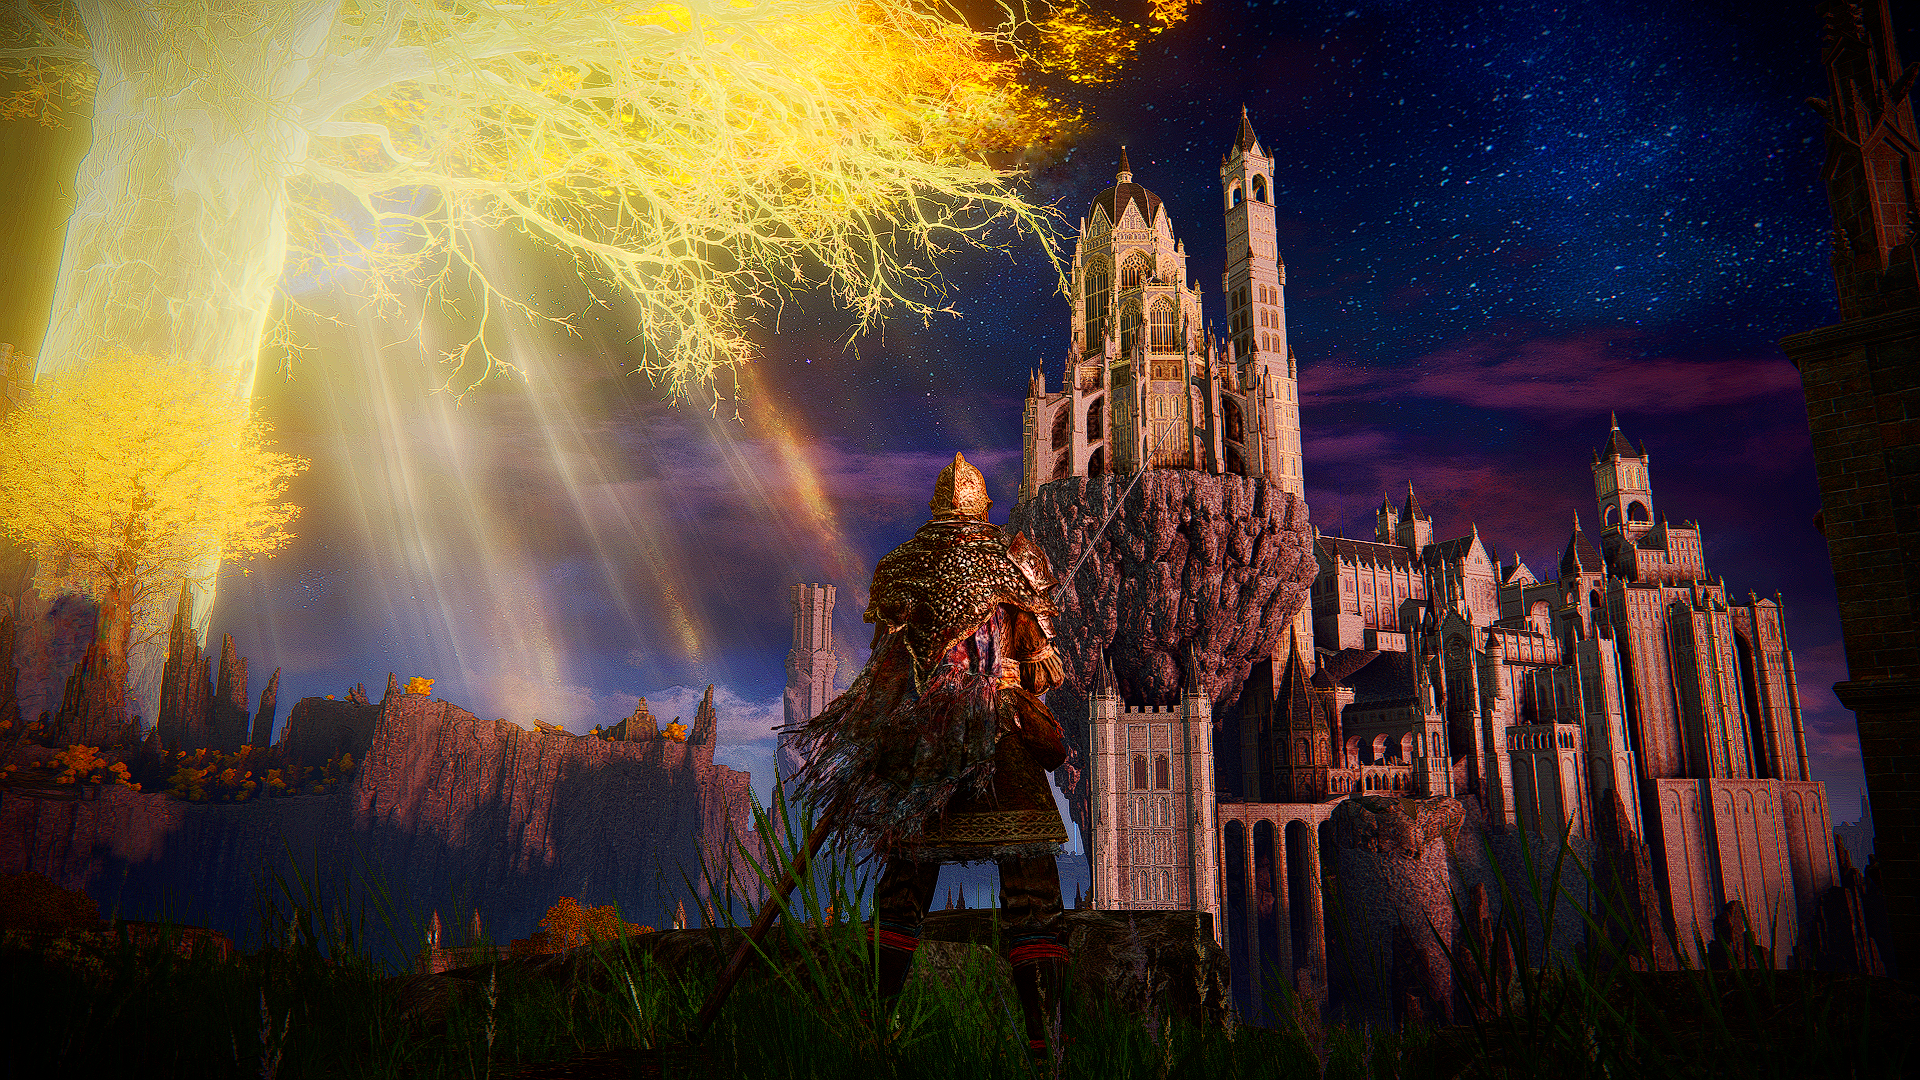 General 1920x1080 From Software Elden Ring digital art video games glowing standing video game characters CGI video game art screen shot armor castle trees katana night sky architecture